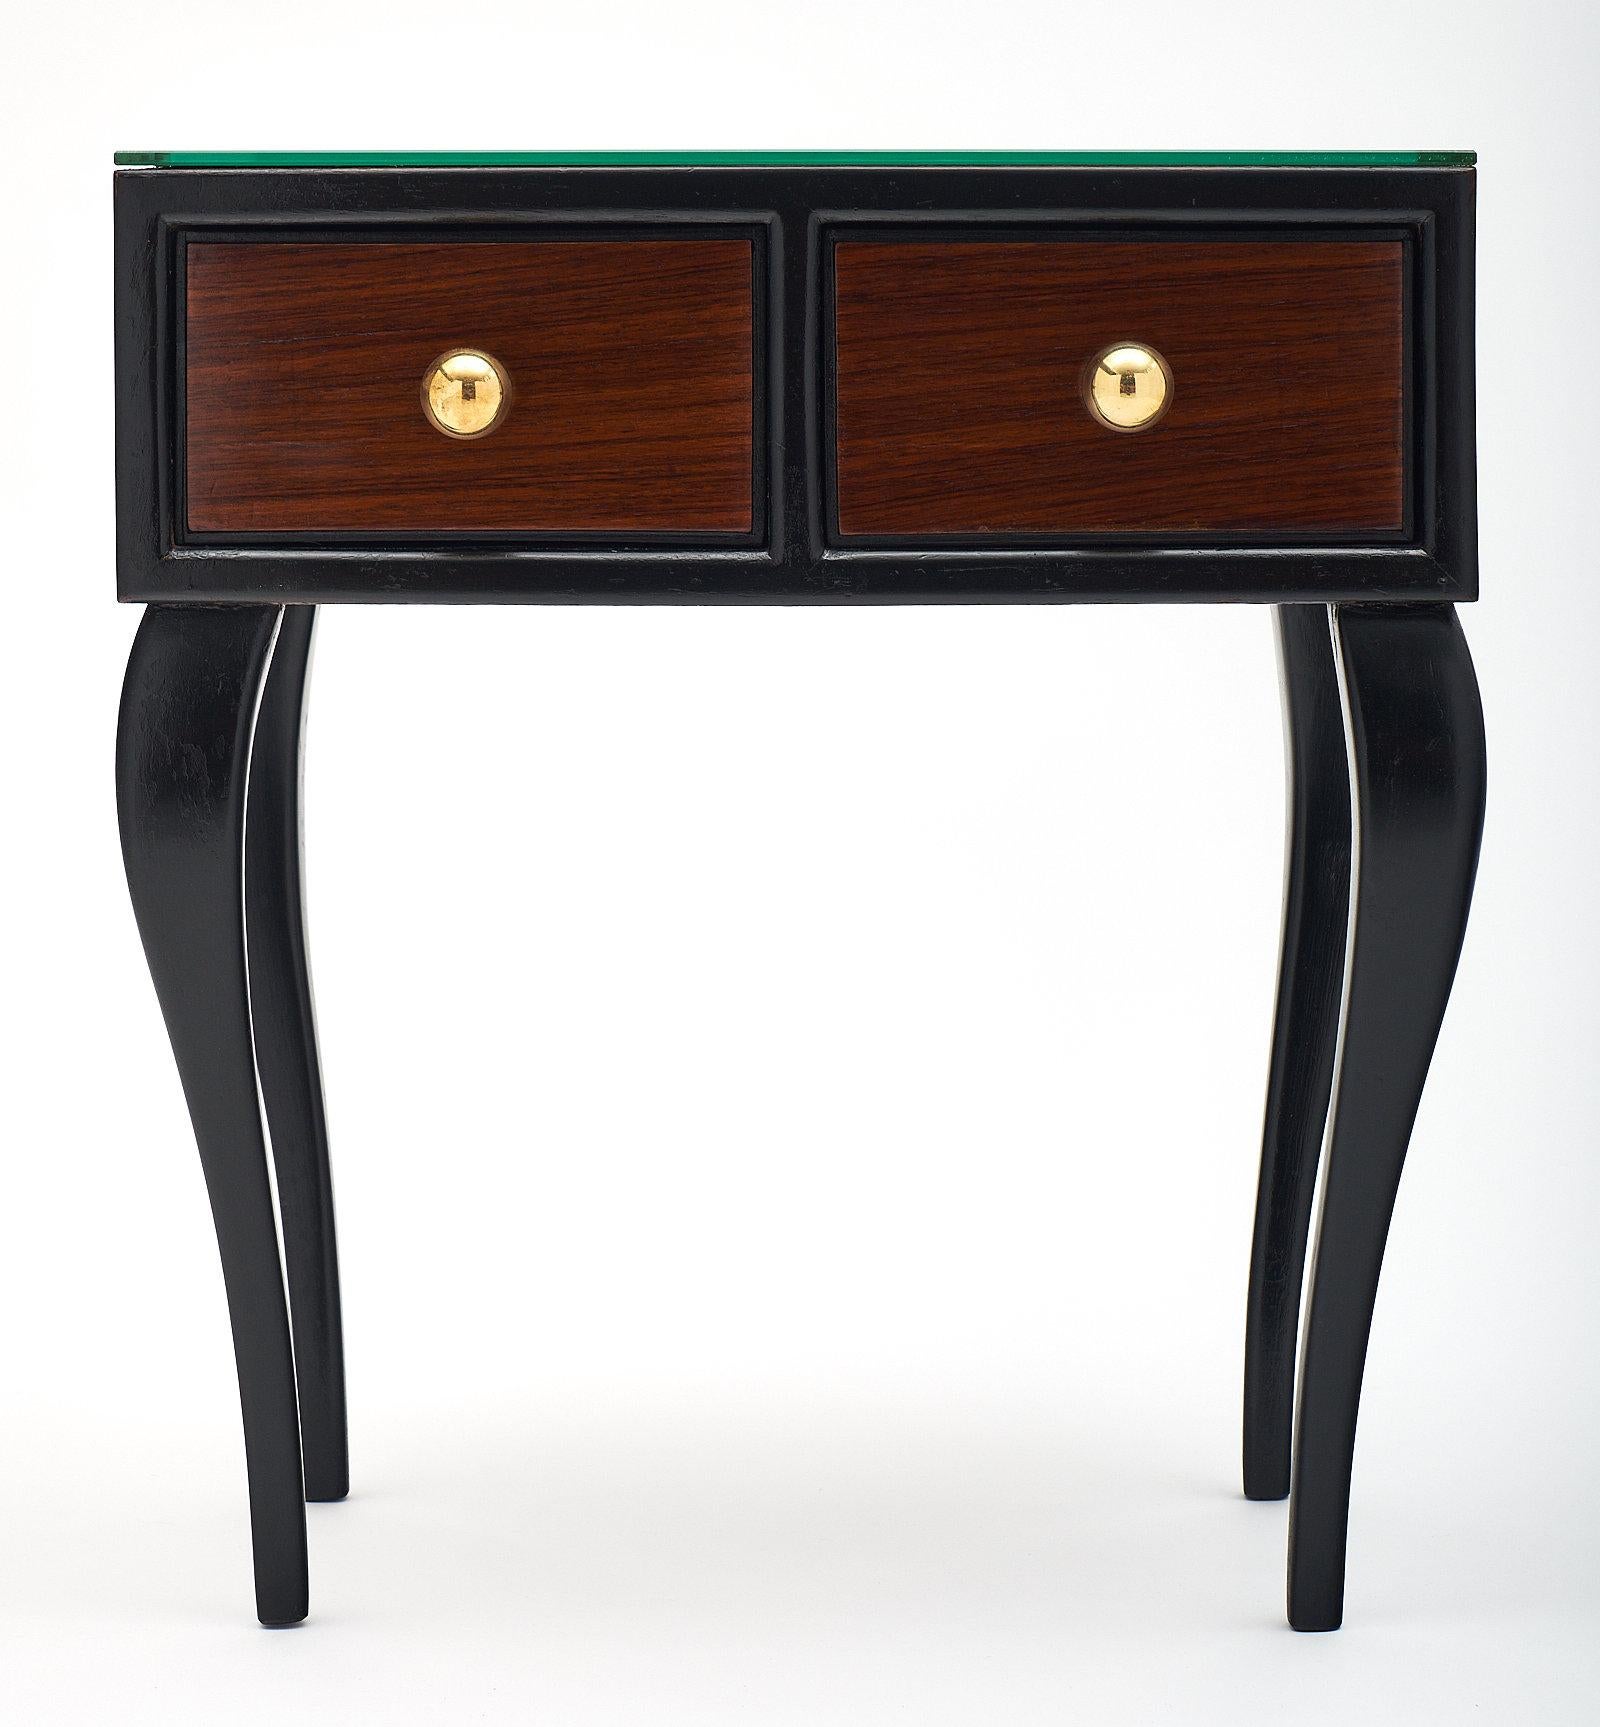 Pair of French Art Deco side tables from Nice, France. This pair is made of rosewood with beautiful ebonized cabriole legs. Each features two dovetailed drawers with brass spherical hardware. The mirrored tops give them a glamorous finish!